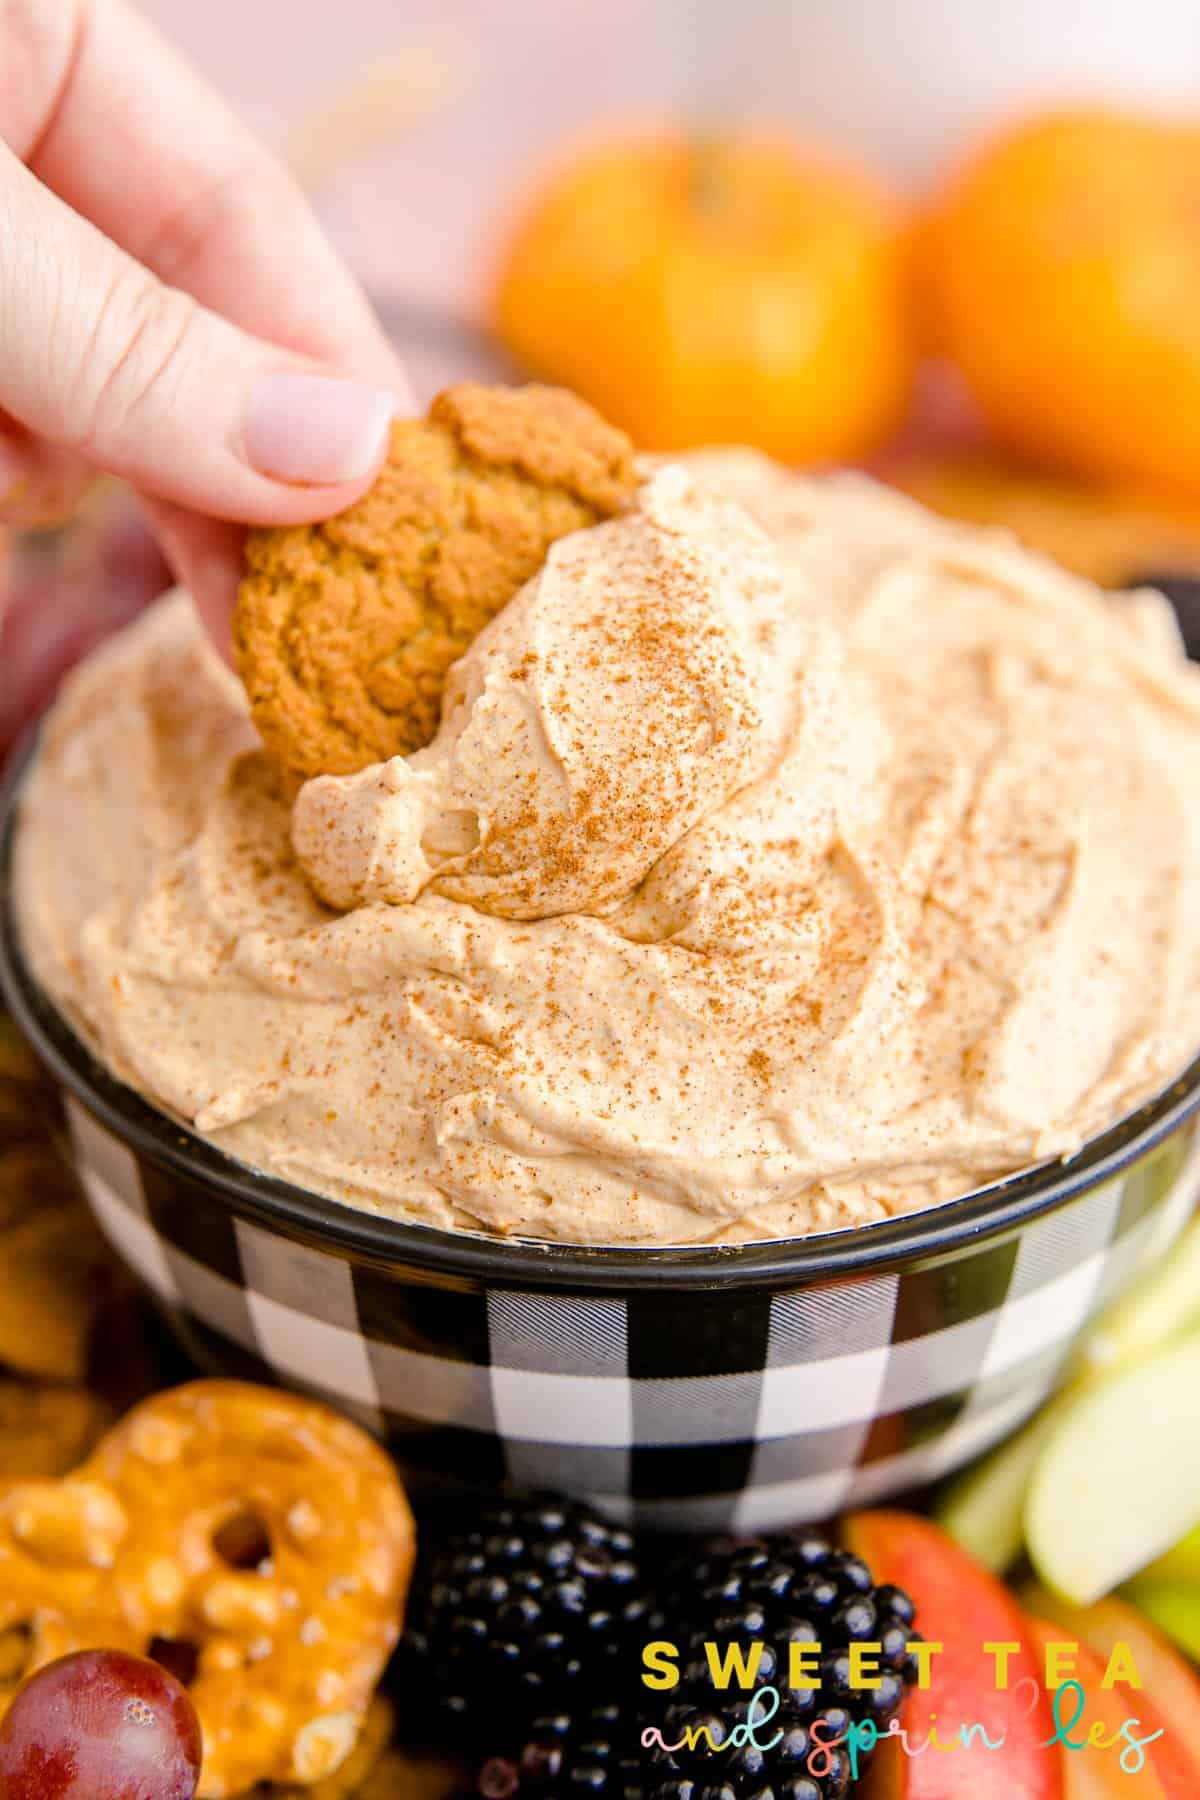 Hand scooping gingersnap into some of the Pumpkin Fluff